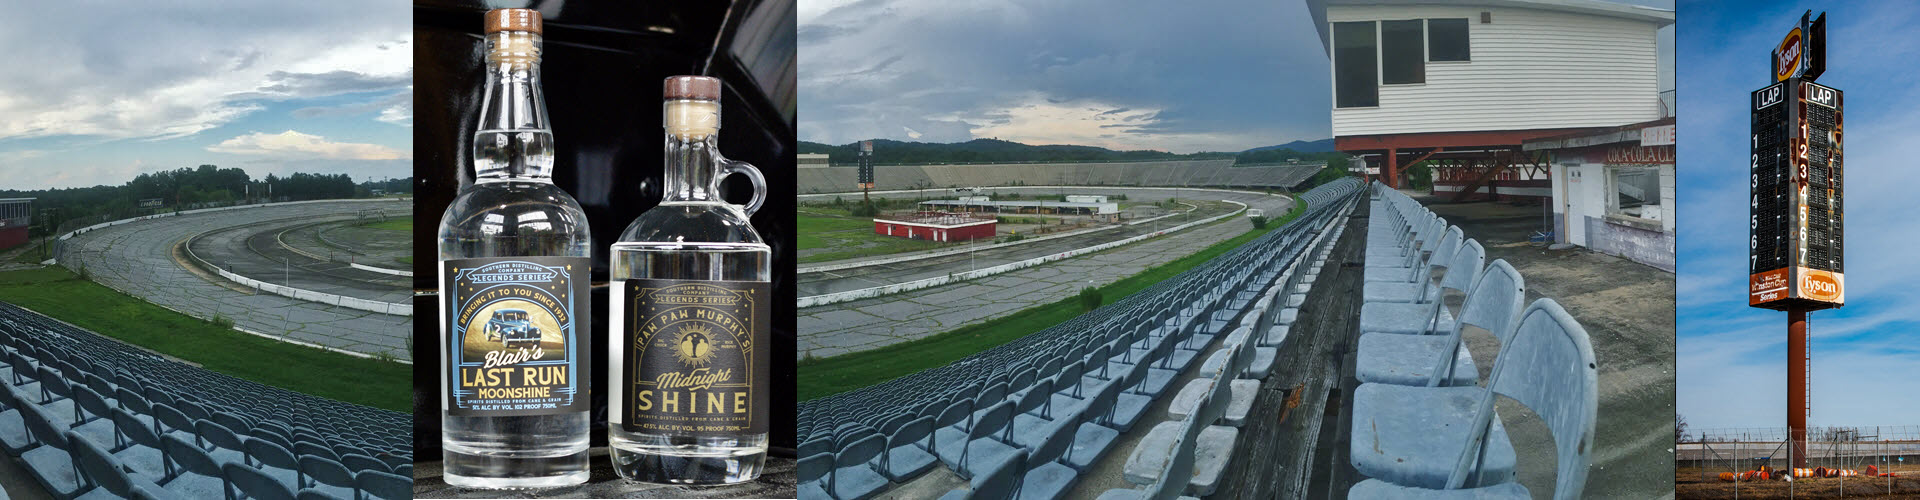 Southern Distilling Co. - NASCAR Rasing and Moonshine Return to North Wilkesboro Speedway